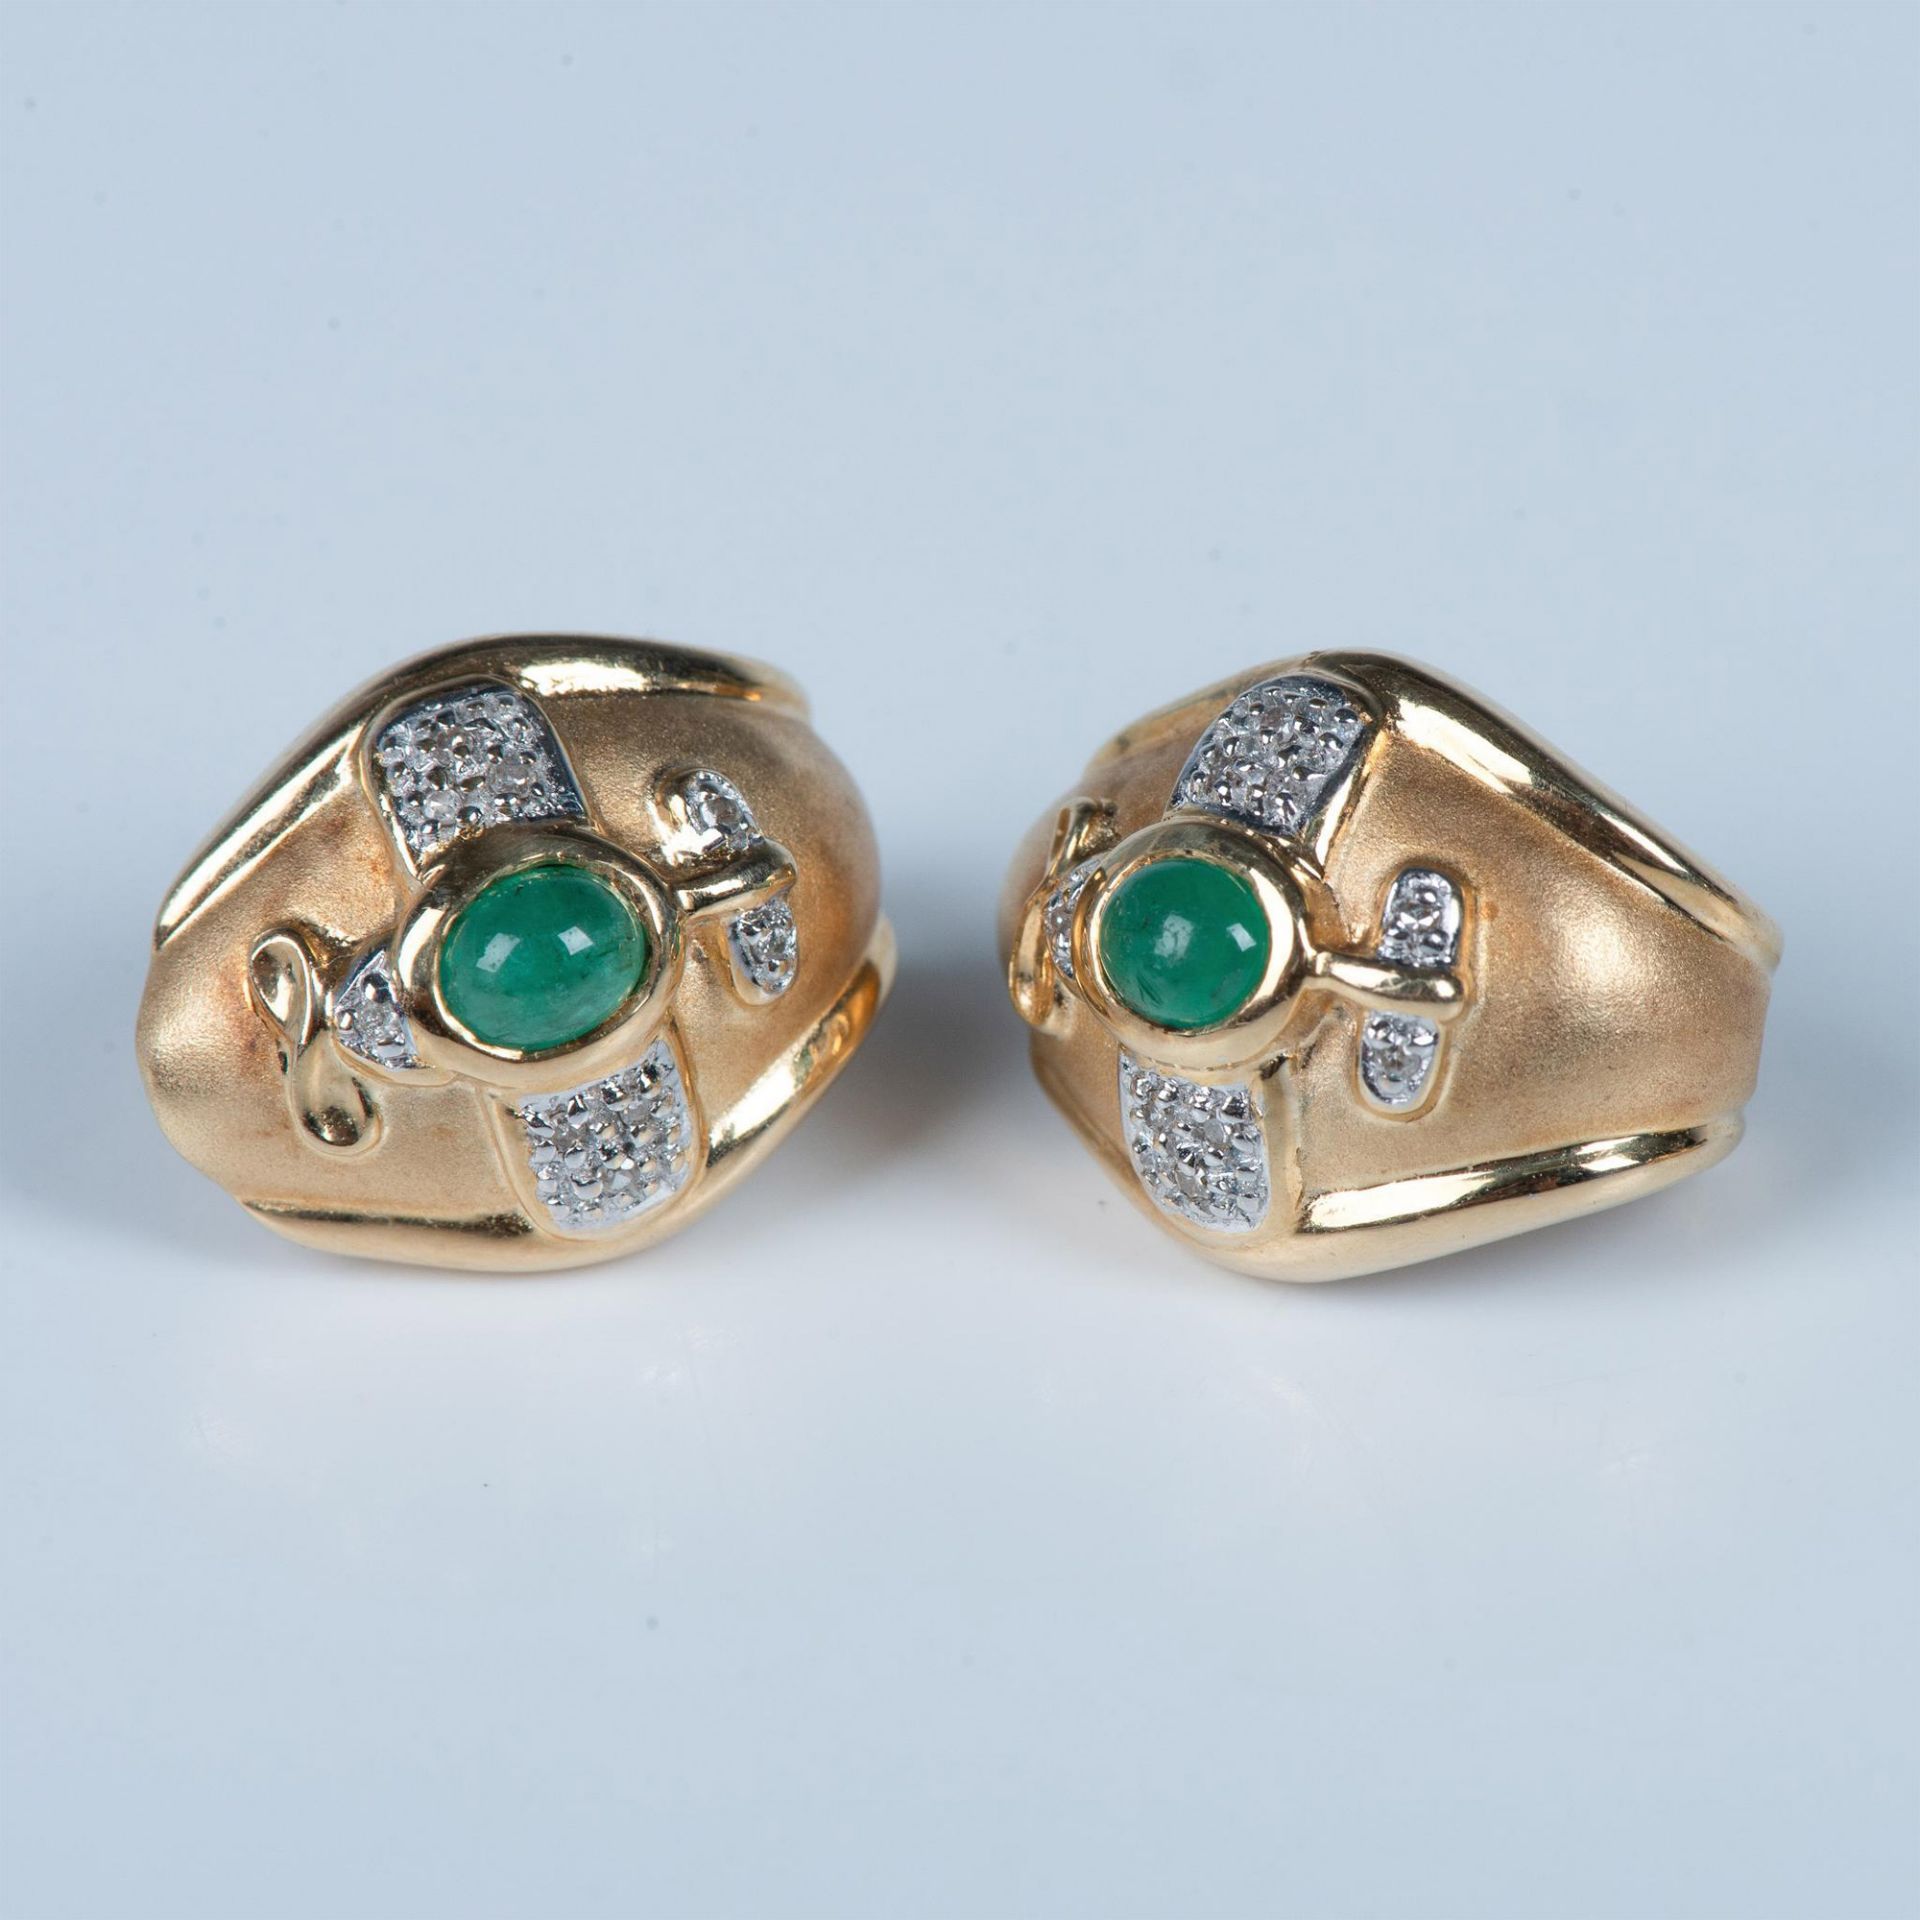 3pc 14k Gold and Emerald Ring and Earring Set - Image 5 of 7